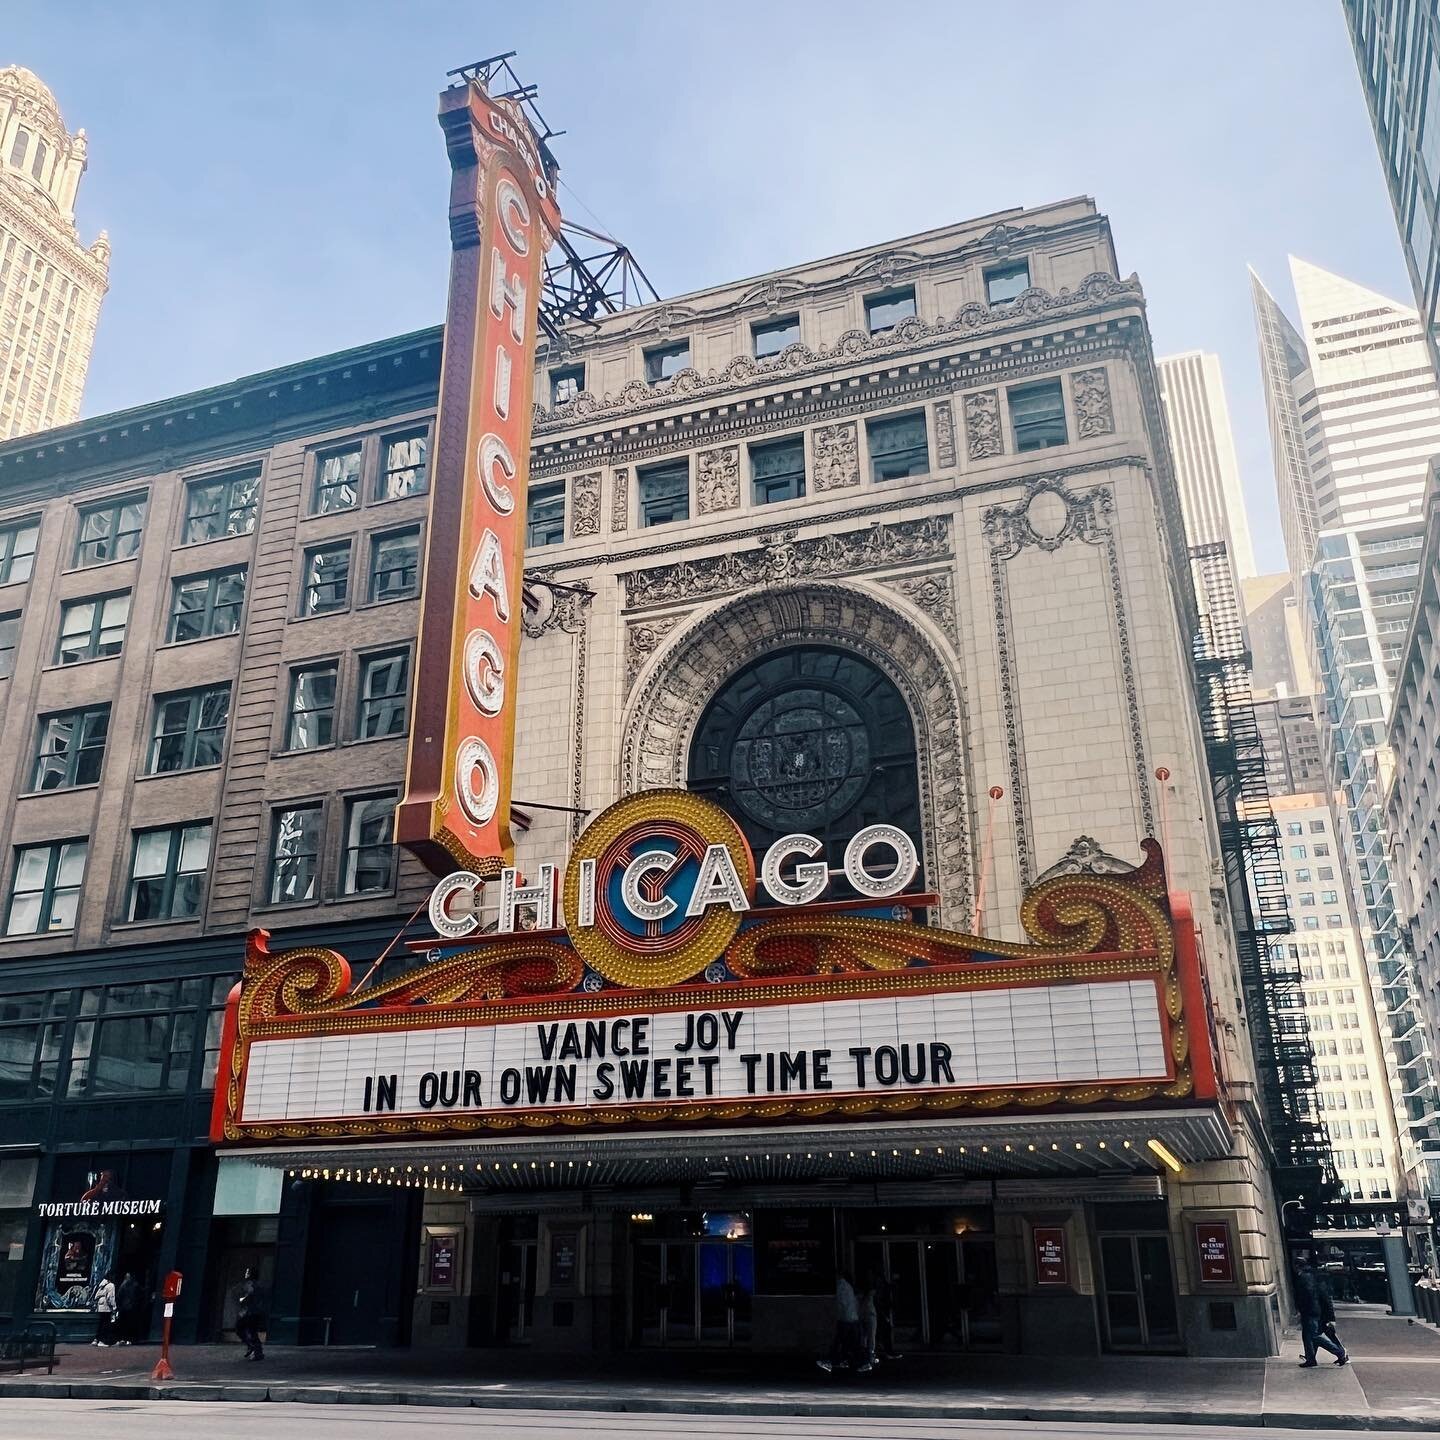 In 2017, when I graduated from Columbia College Chicago, I should&rsquo;ve walked across the stage at this beautiful theater, but instead they moved commencement to the Auditorium Theatre which didn&rsquo;t quite have the same magic to me. I&rsquo;ve